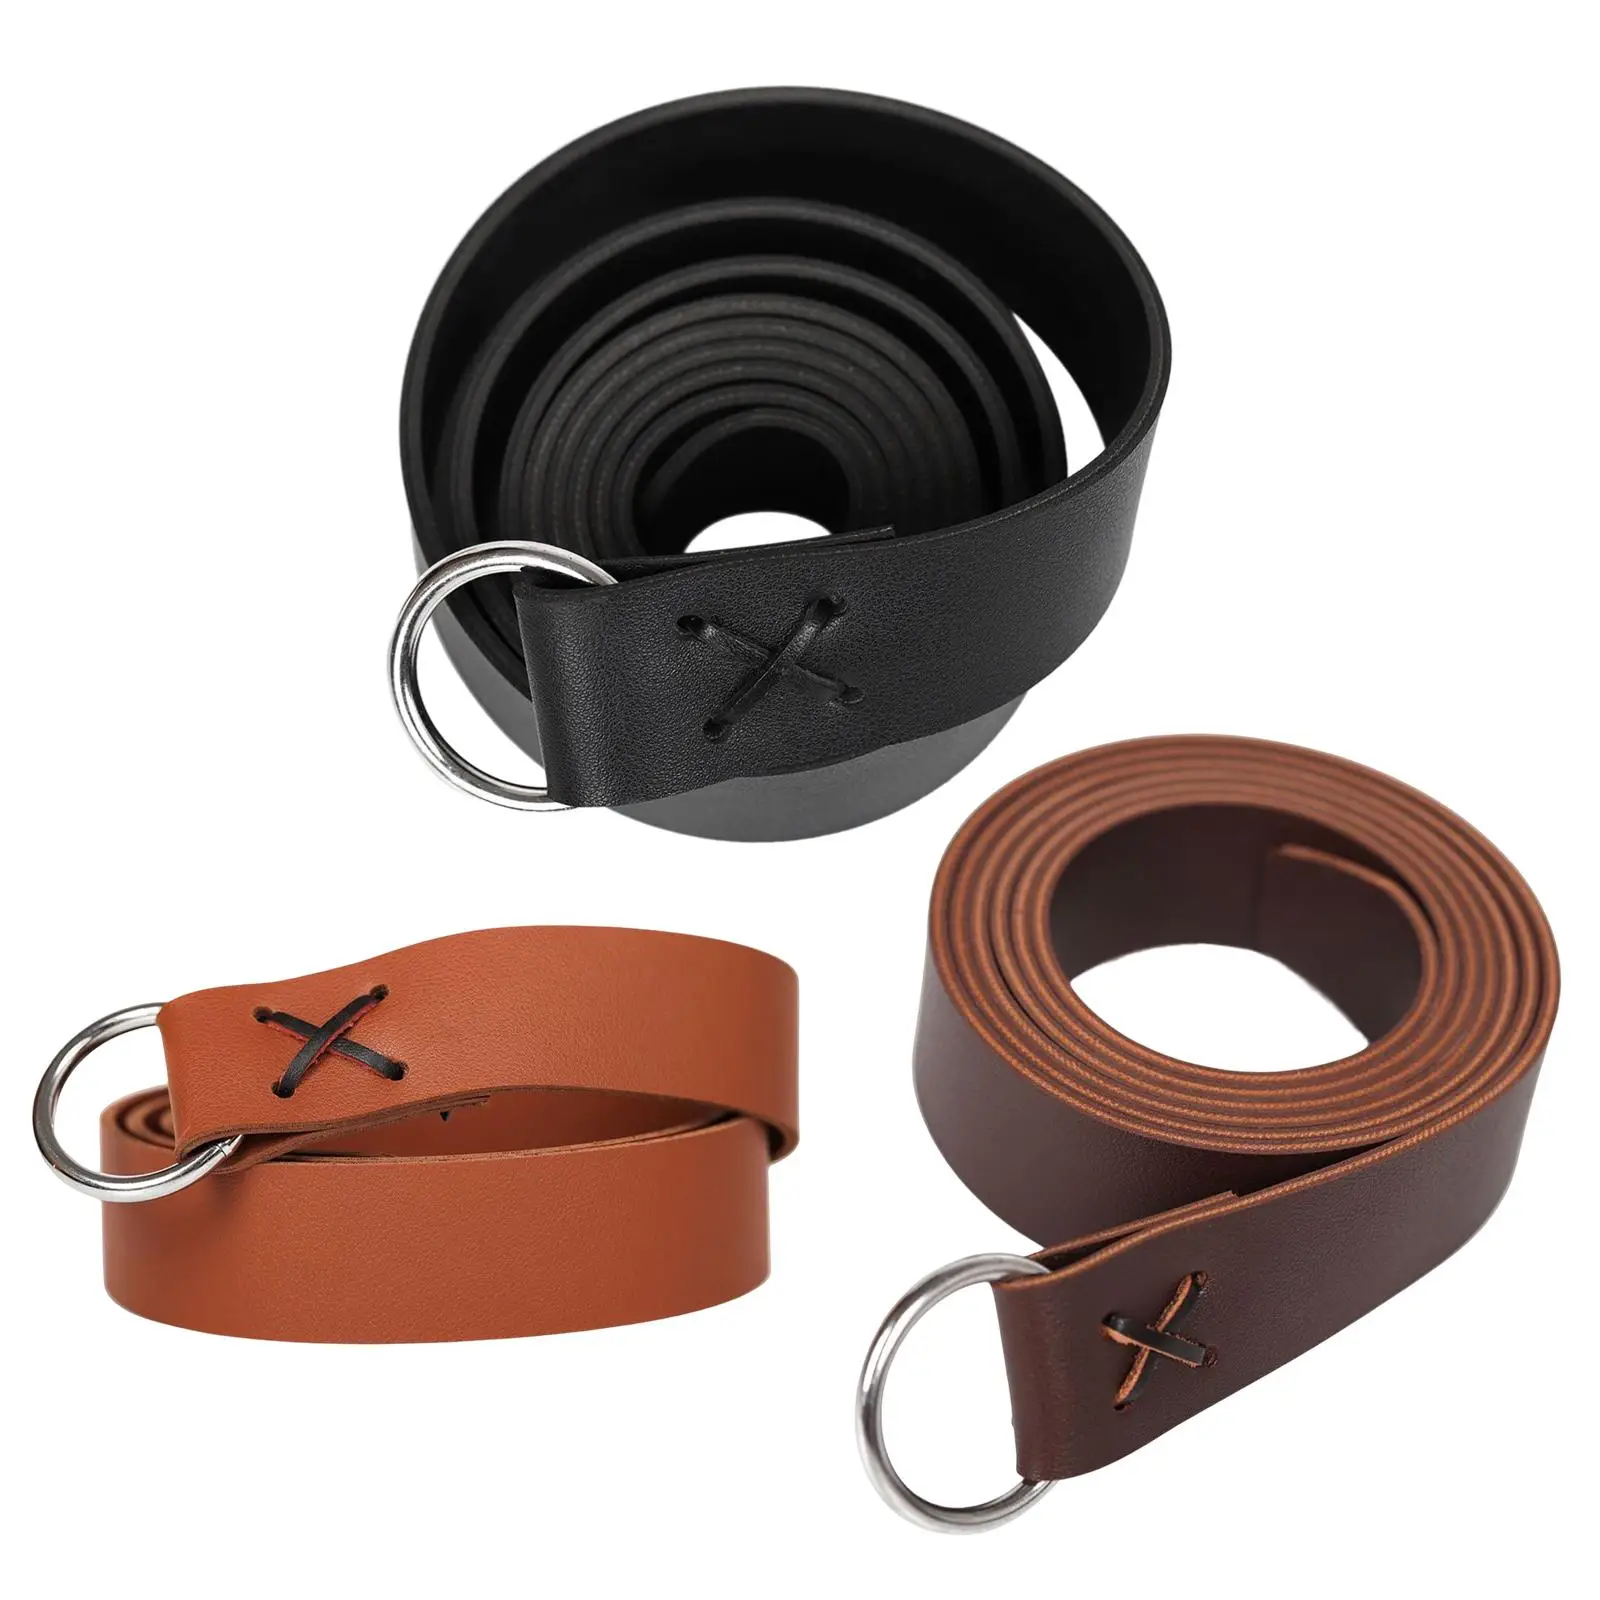 Leather Medieval Belt Costume Accessories Photo Props Waistband Viking Belt for Medieval Events Halloween Party Decoration